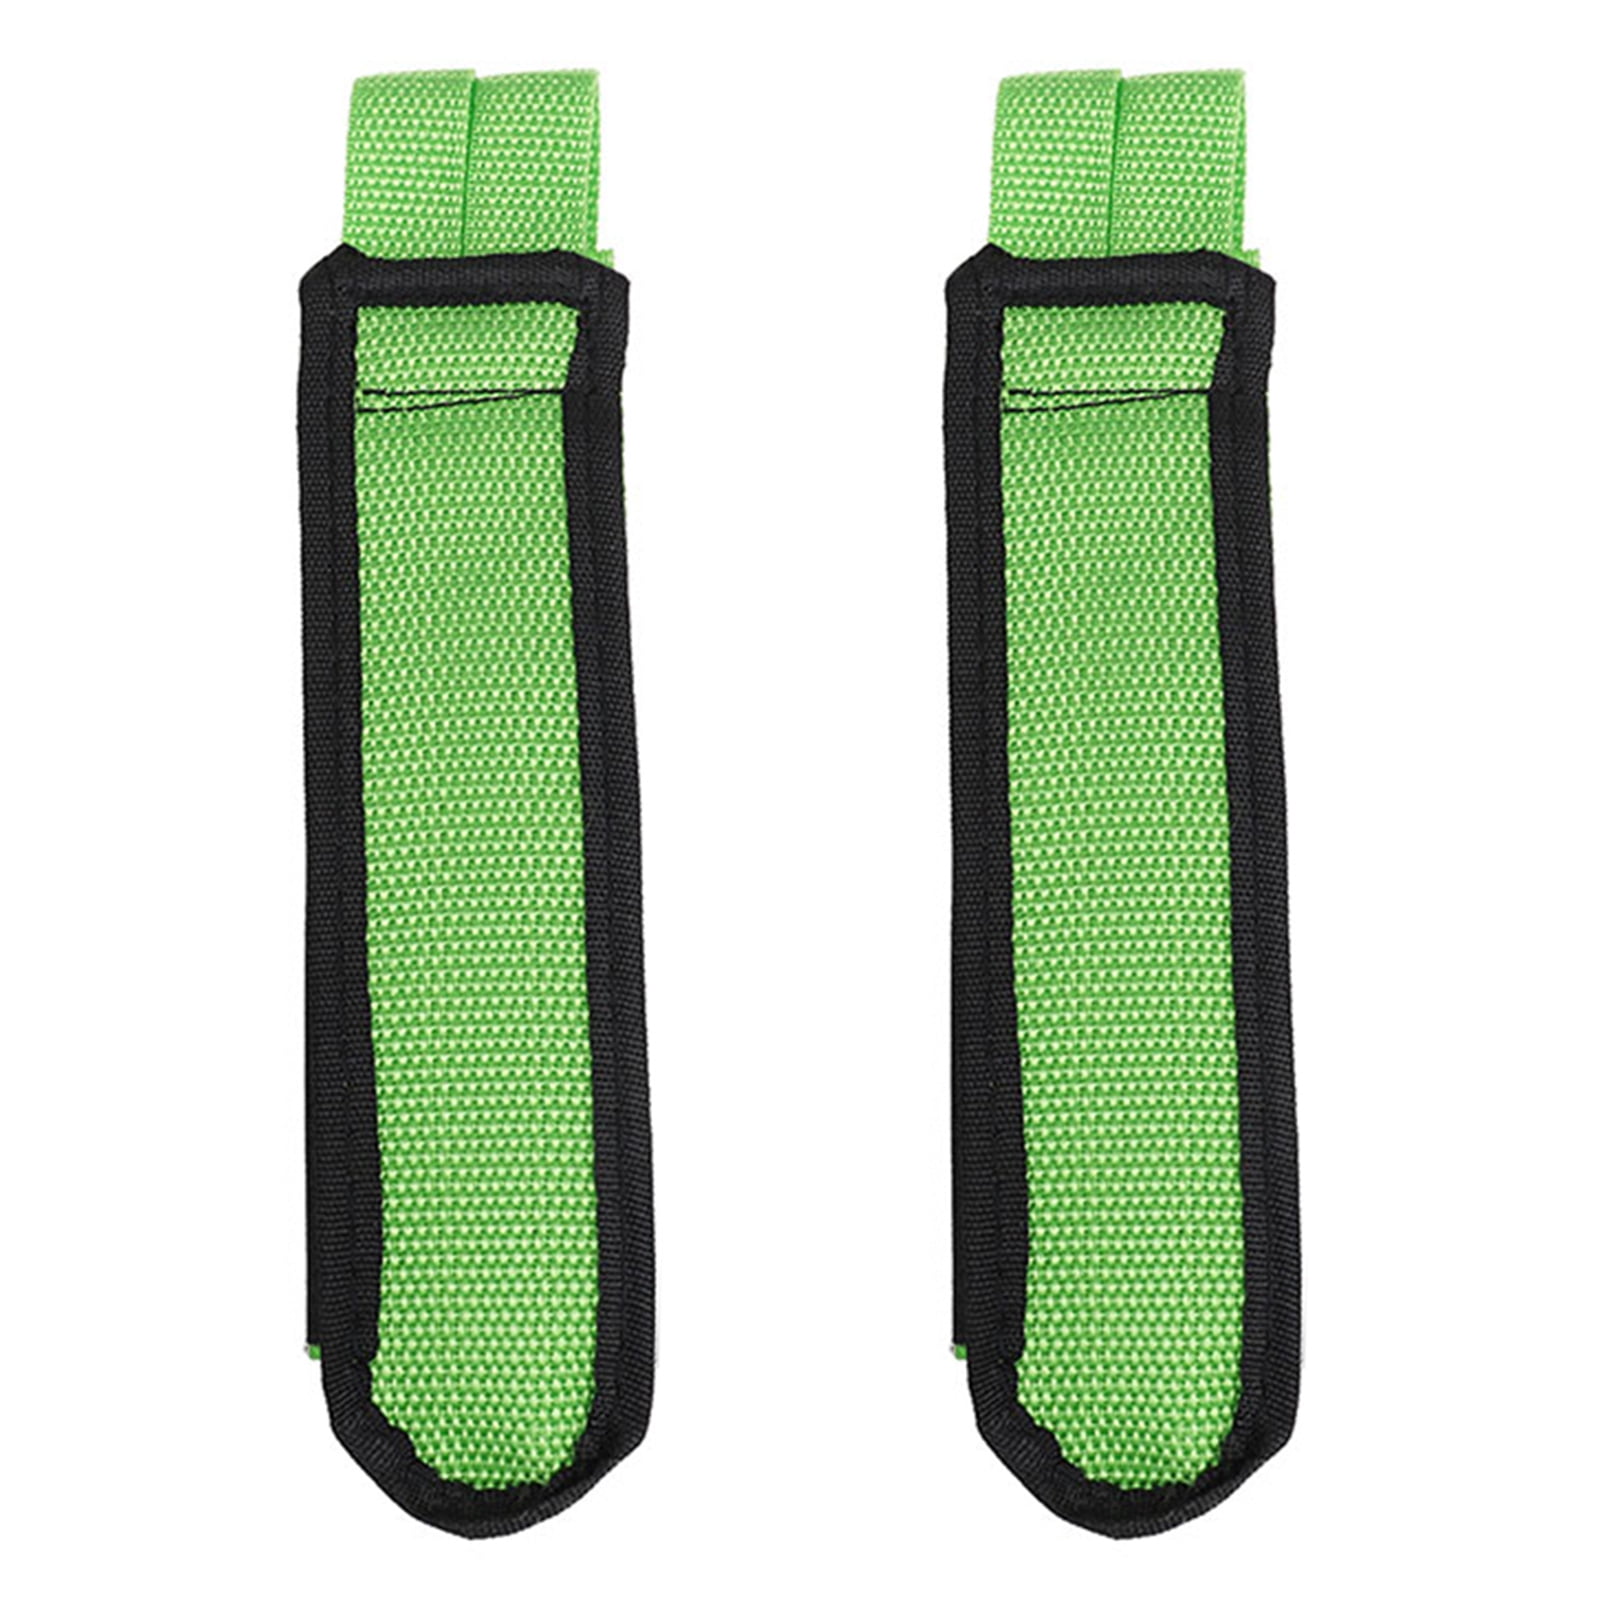 Bicycle Bike Cycling Pedal Bands Feet Foot Toe Clip Road Binding Straps Fixed